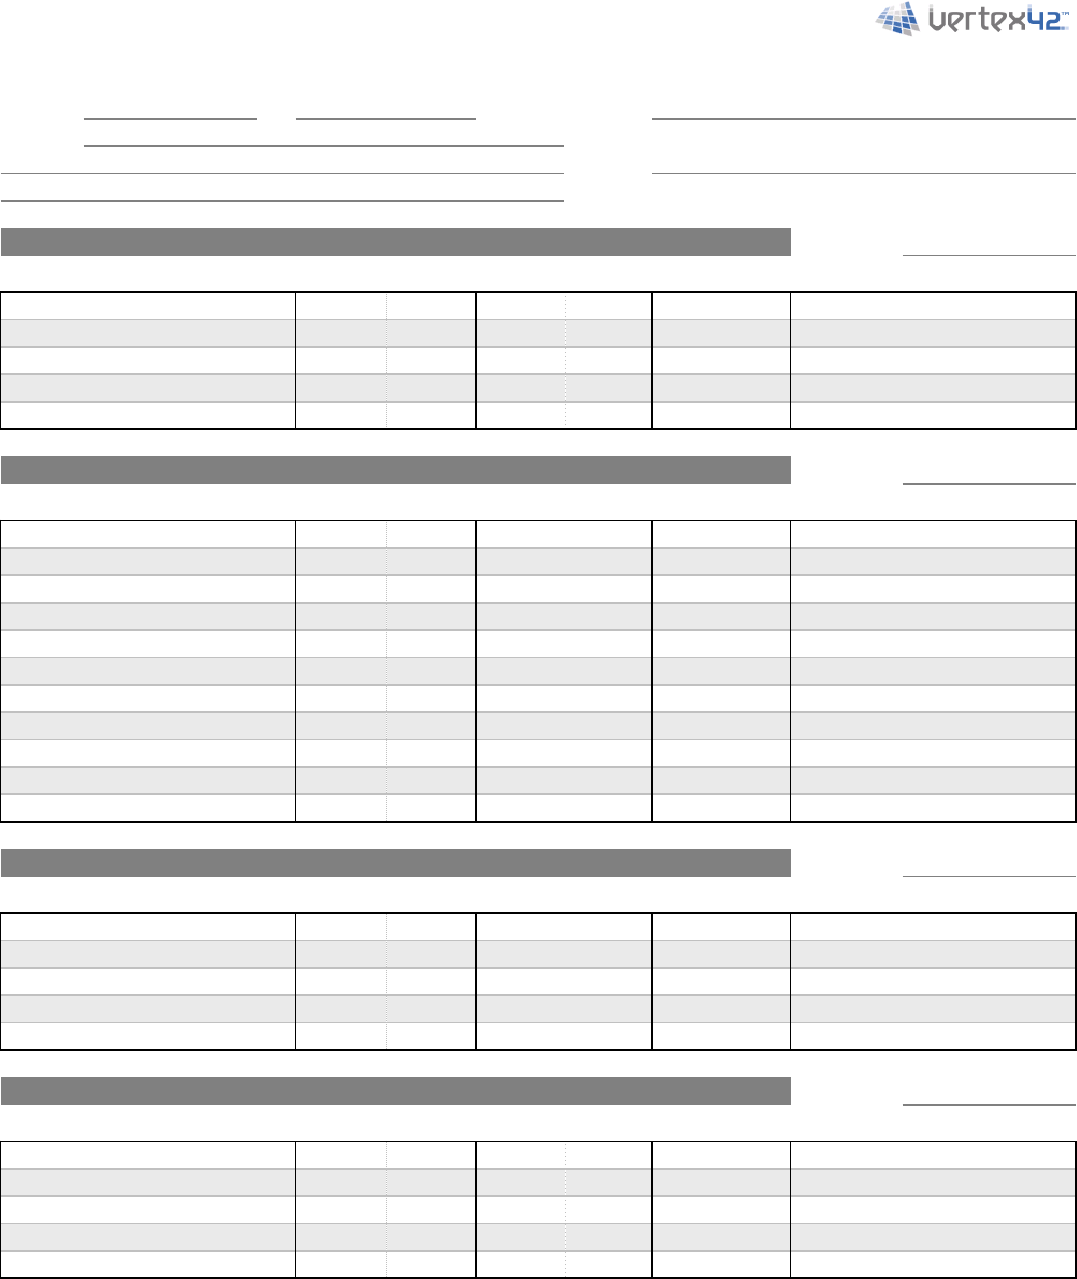 Free Exercise Chart Template - xls | 33KB | 1 Page(s)